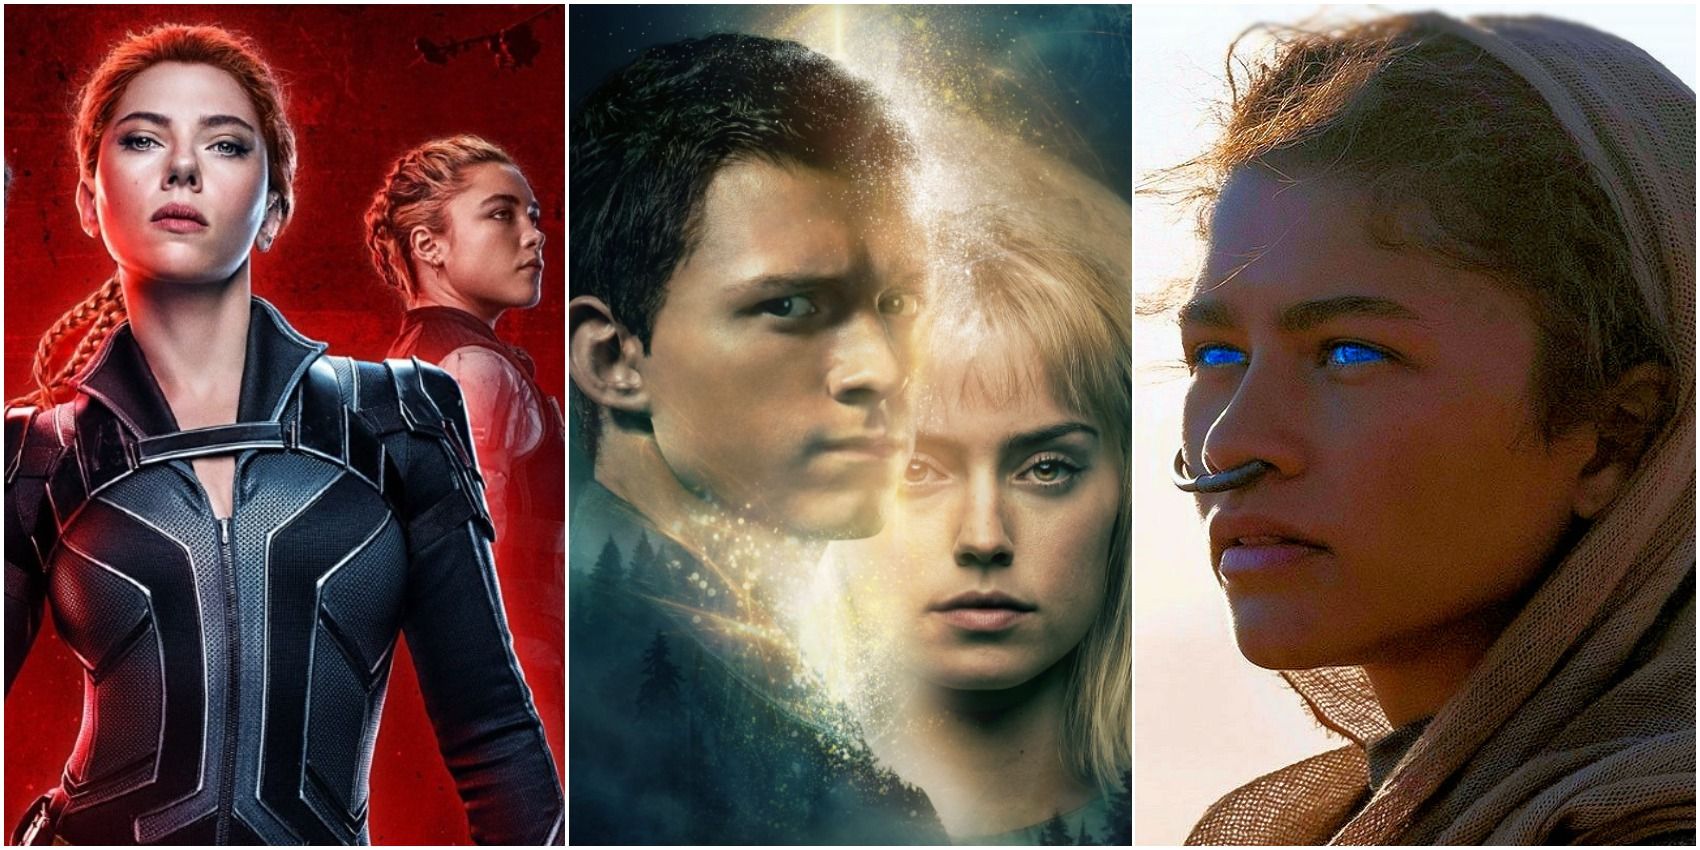 The 10 Most Anticipated Sci Fi Movies Of 21 According To Their Imdb Popularity